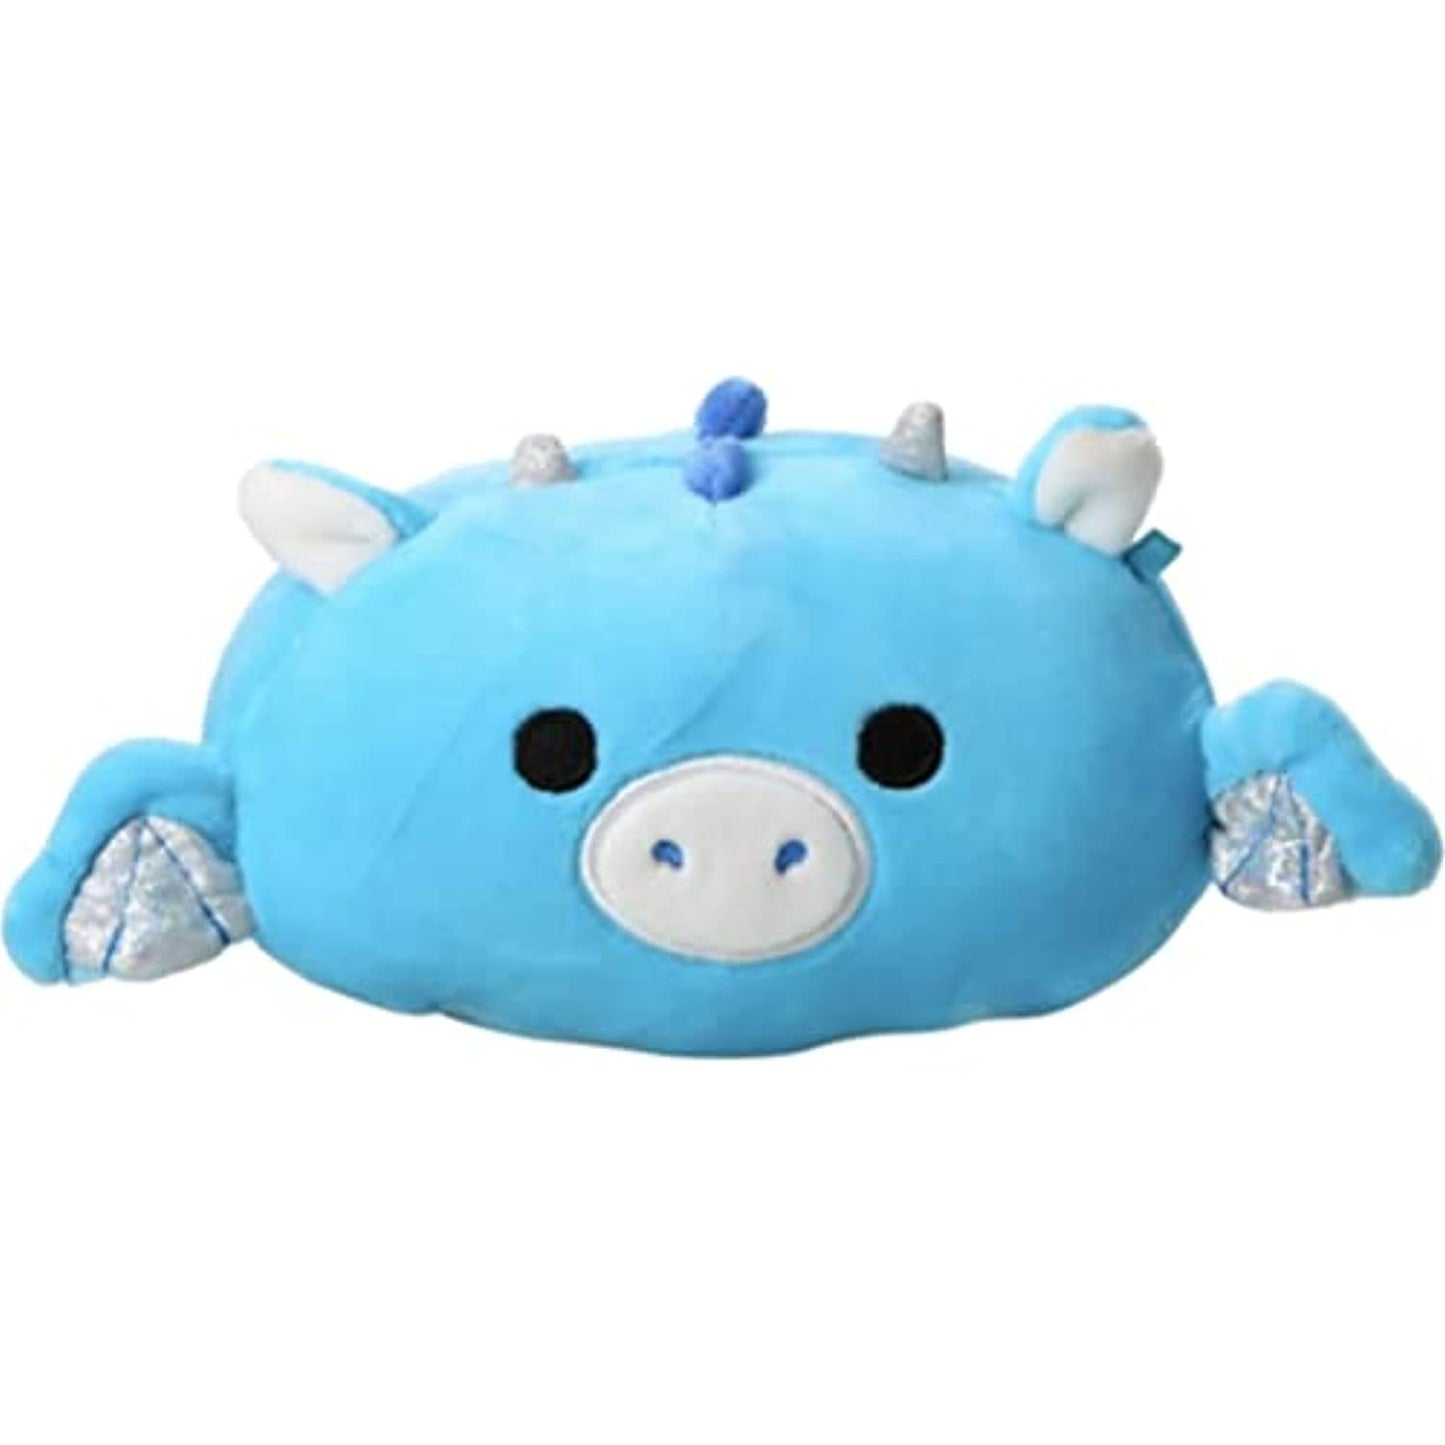 Squishmallows Devin the Blue Dragon 6" Stackable Plush Stuffed Animal